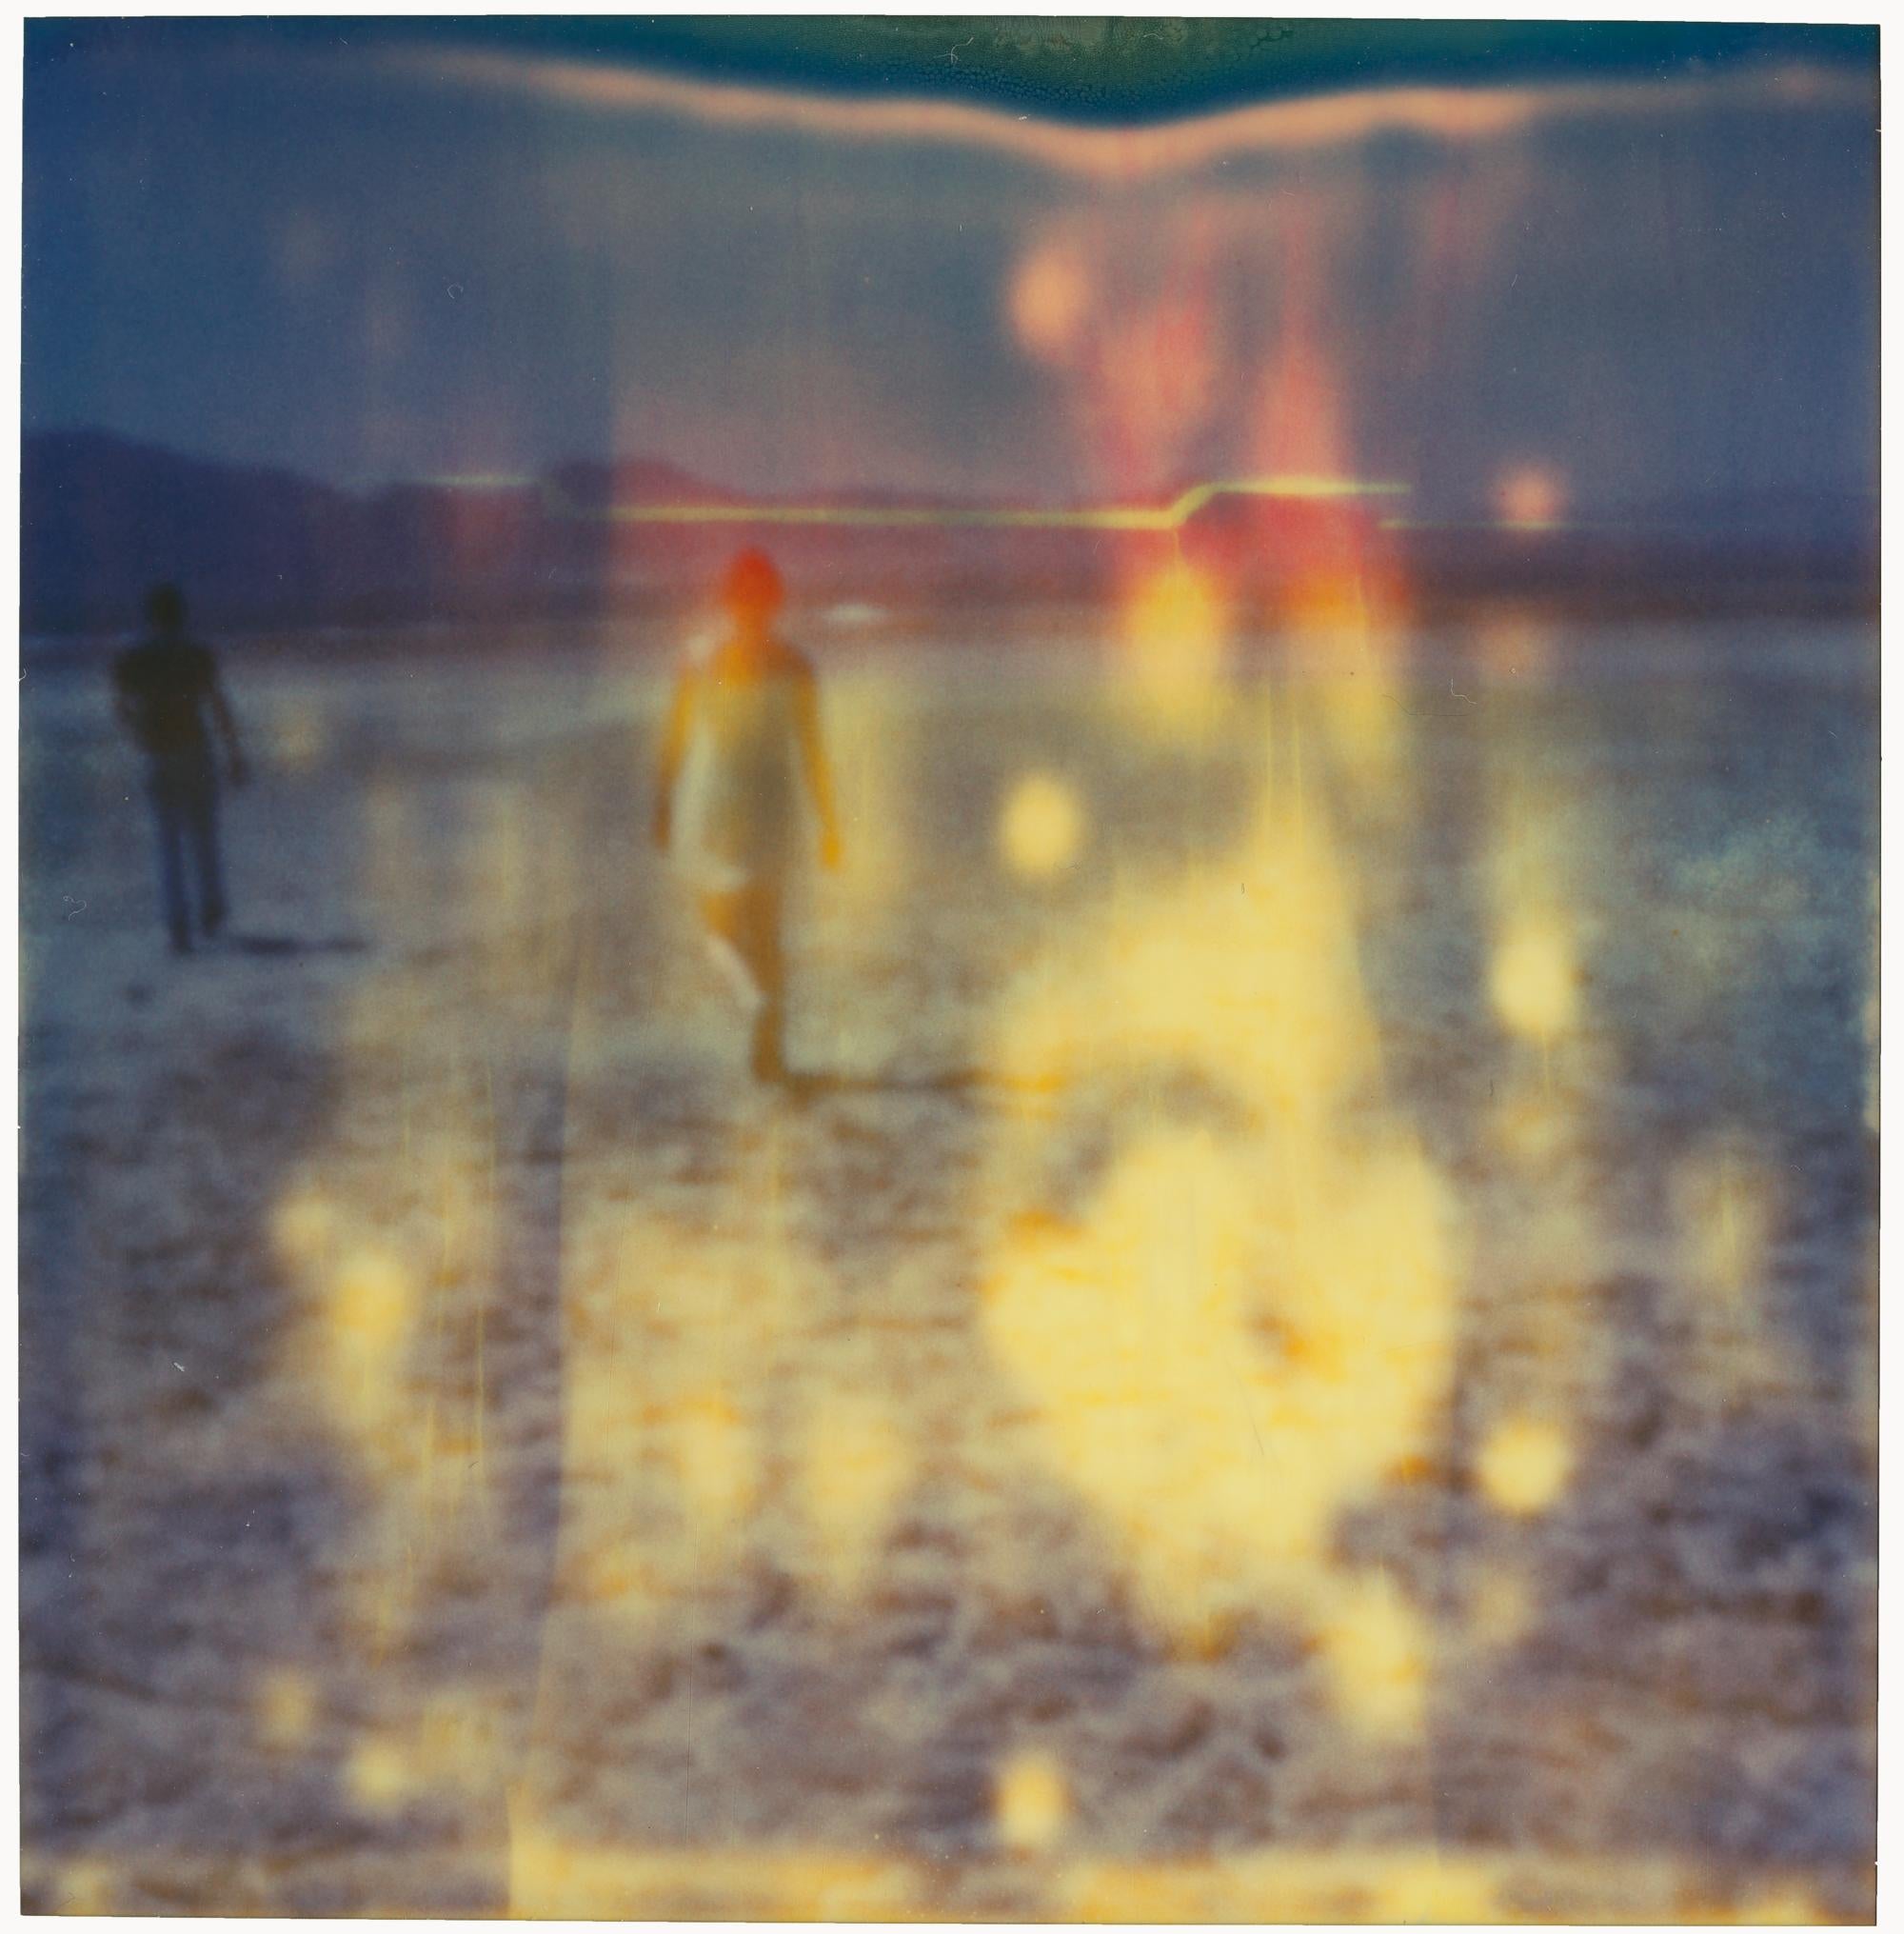 Abstract Photograph Stefanie Schneider - Day for Night - Planet of the Apes 01 - 21st Century, Polaroid, abstrait